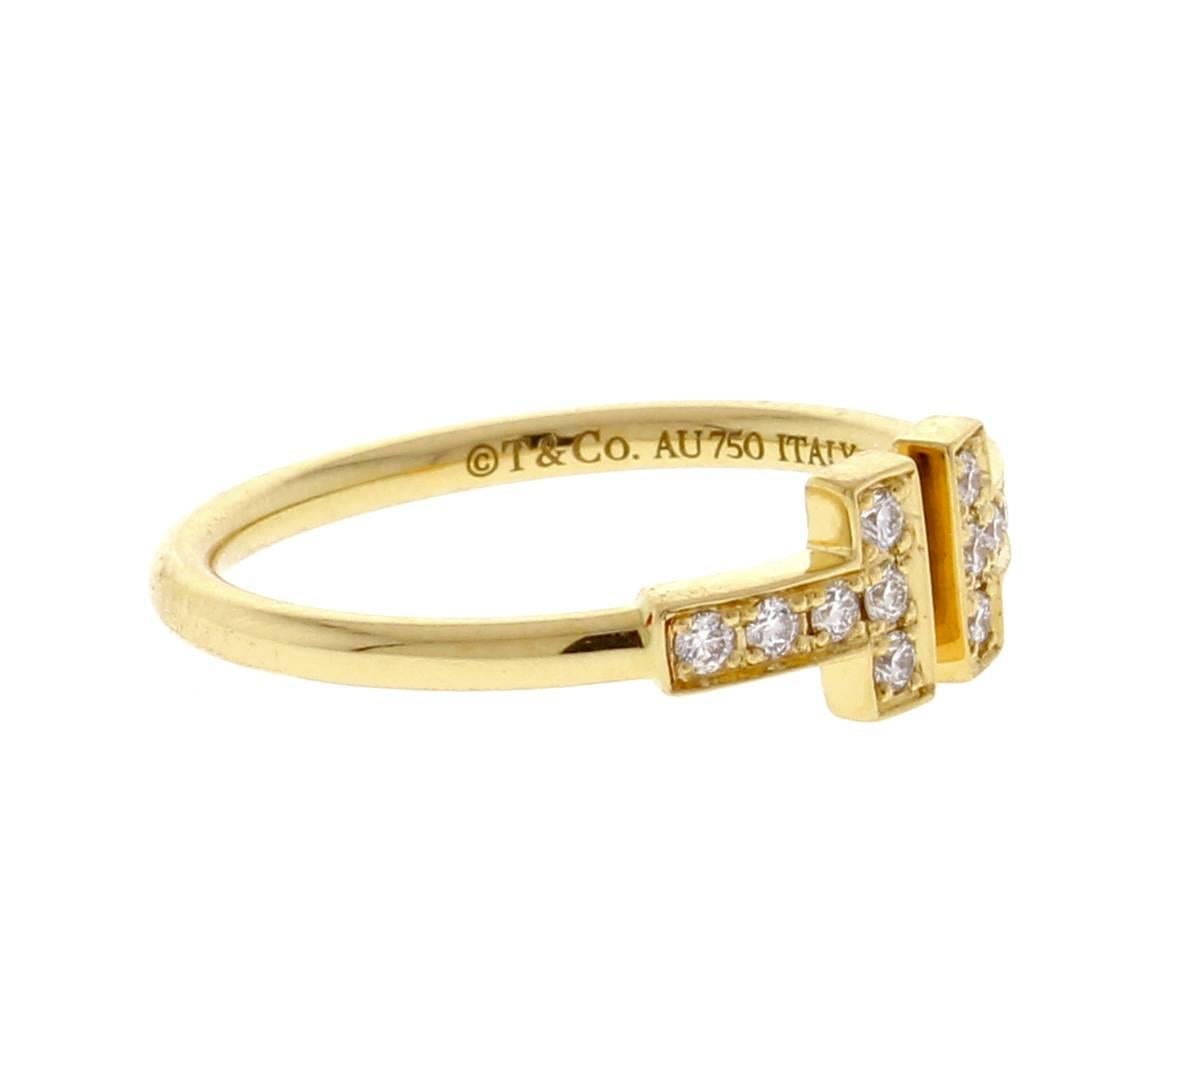 Graphic angles and clean lines blend to create the beautiful clarity of the Tiffany T collection. Dazzling diamonds accentuate this ring's bold and timeless form. 12 Brilliant diamonds weigh .13 carats. crafted in 18 karat gold. Size 6